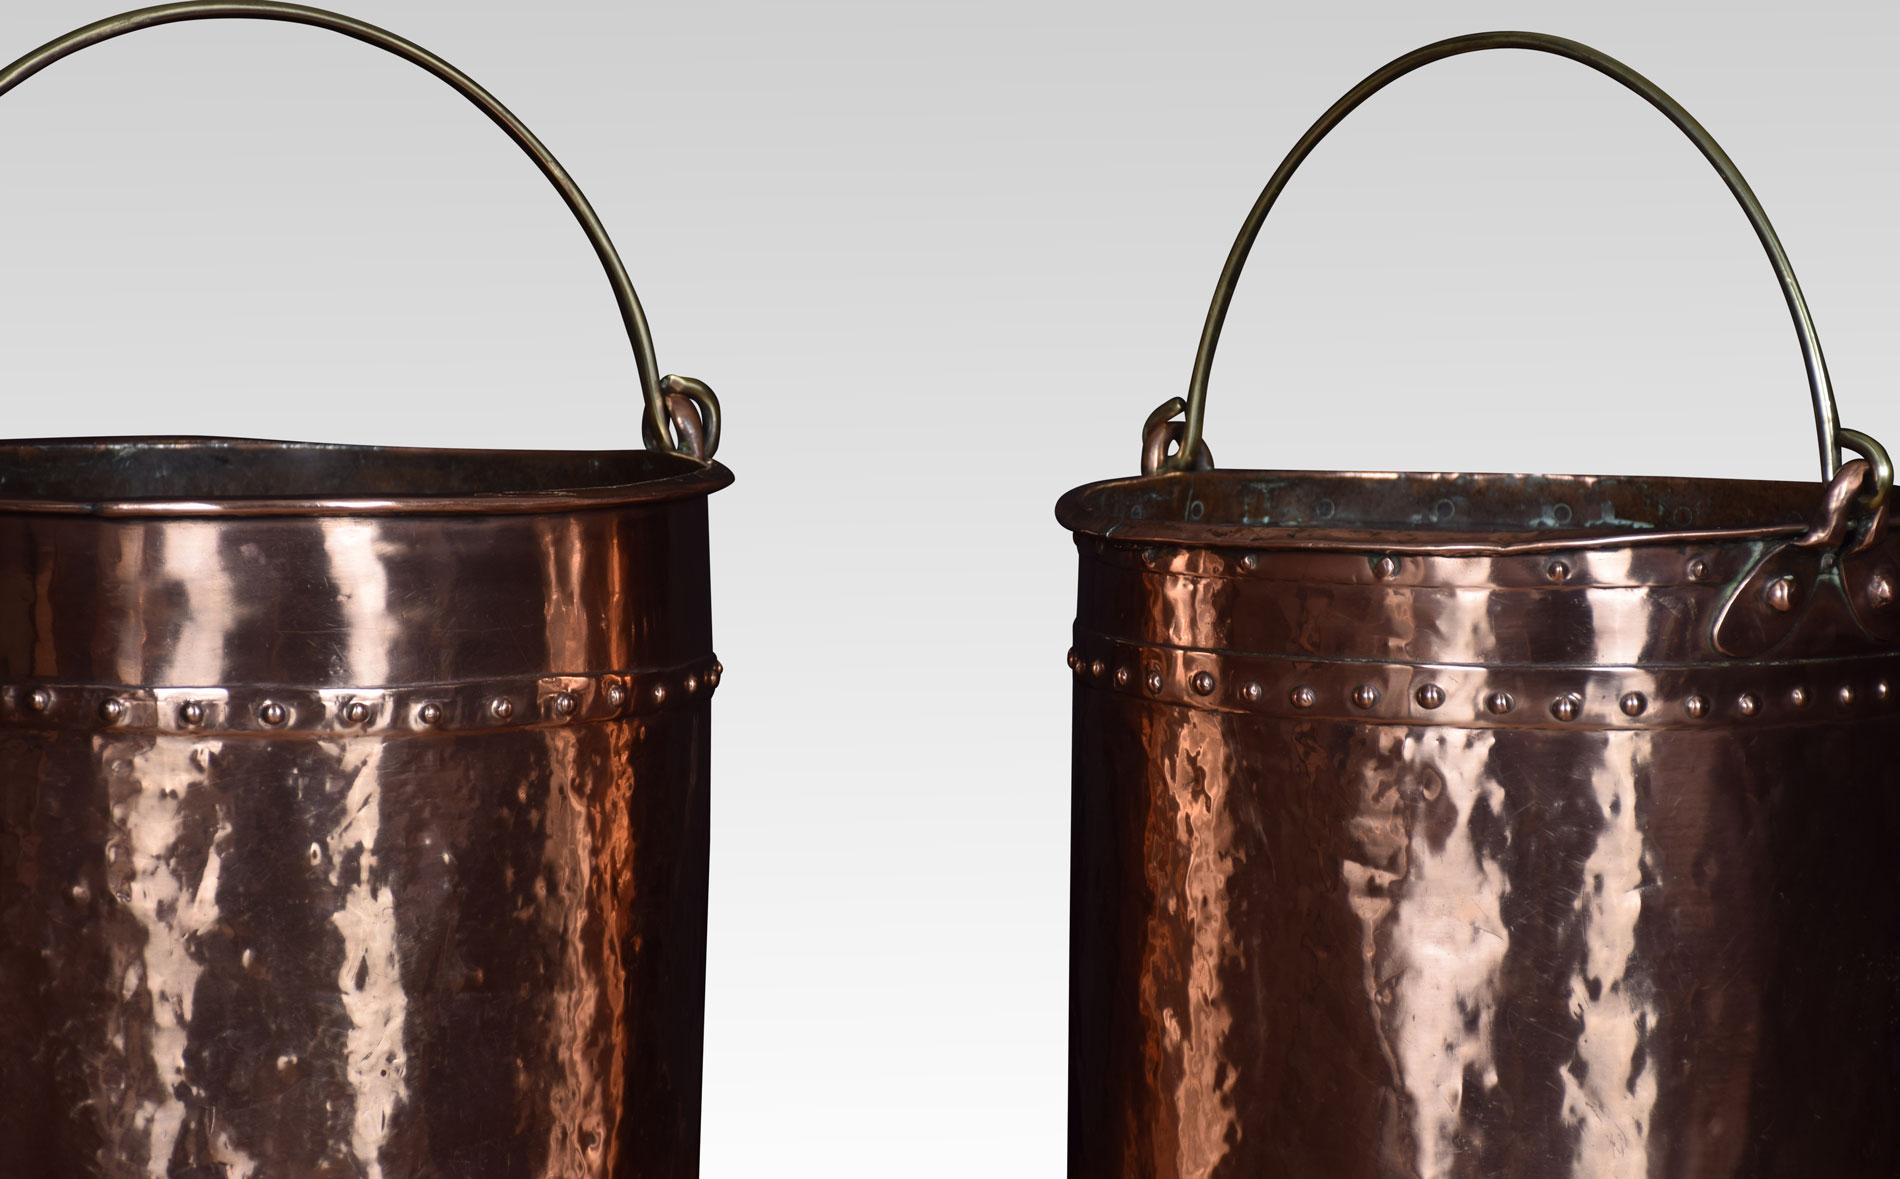 Near pair of 19th century copper coal buckets, each with rivet detail and applied with brass swing handles.
Dimensions
Large bucket
Height 12 inches
Width 13.5 inches
Depth 13.5 inches 

Smaller bucket
Height 11.5 inches
Width 13